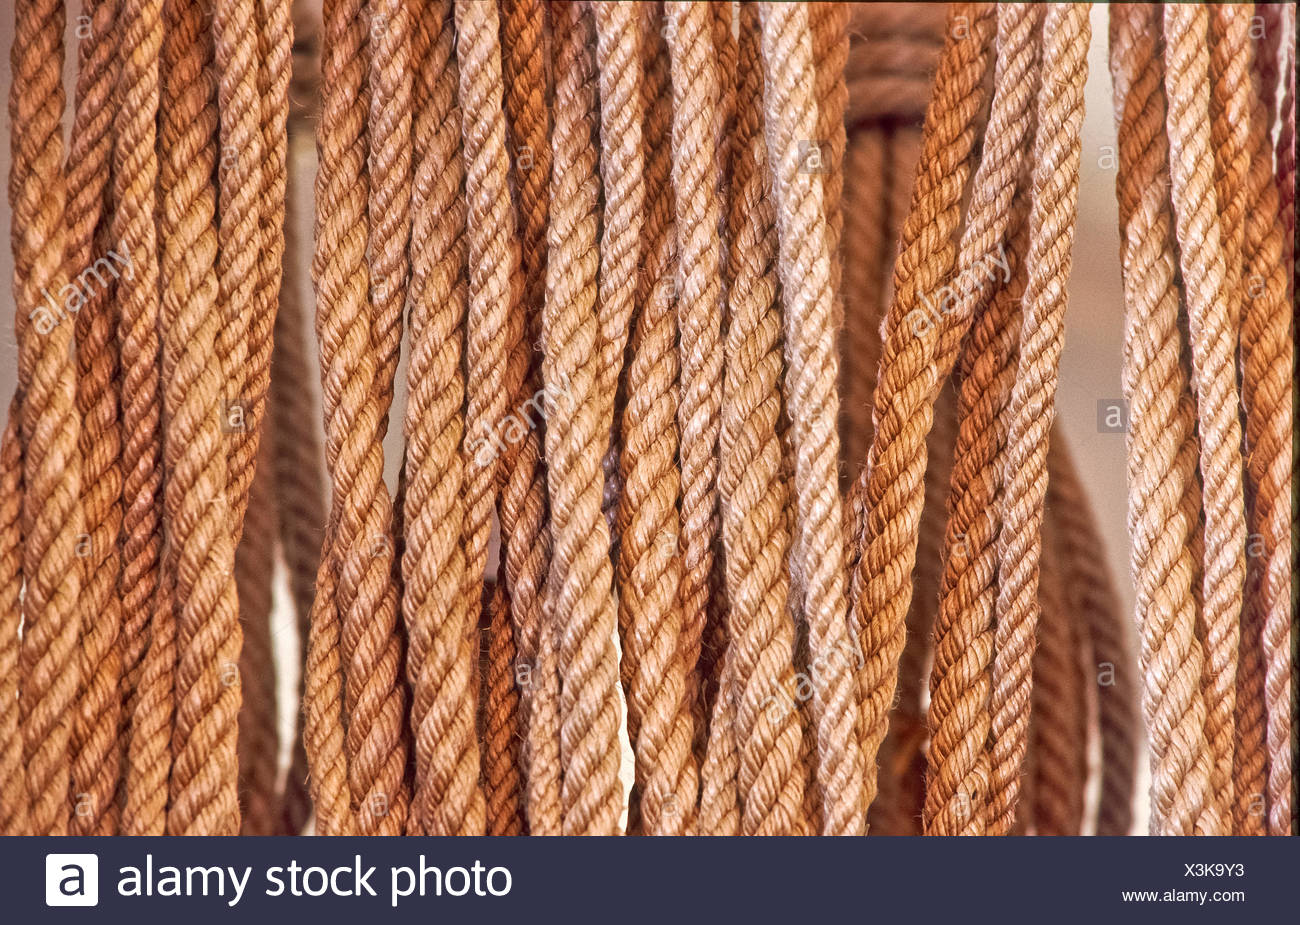 Scourge Whip Stock Photos & Scourge Whip Stock Images - Alamy